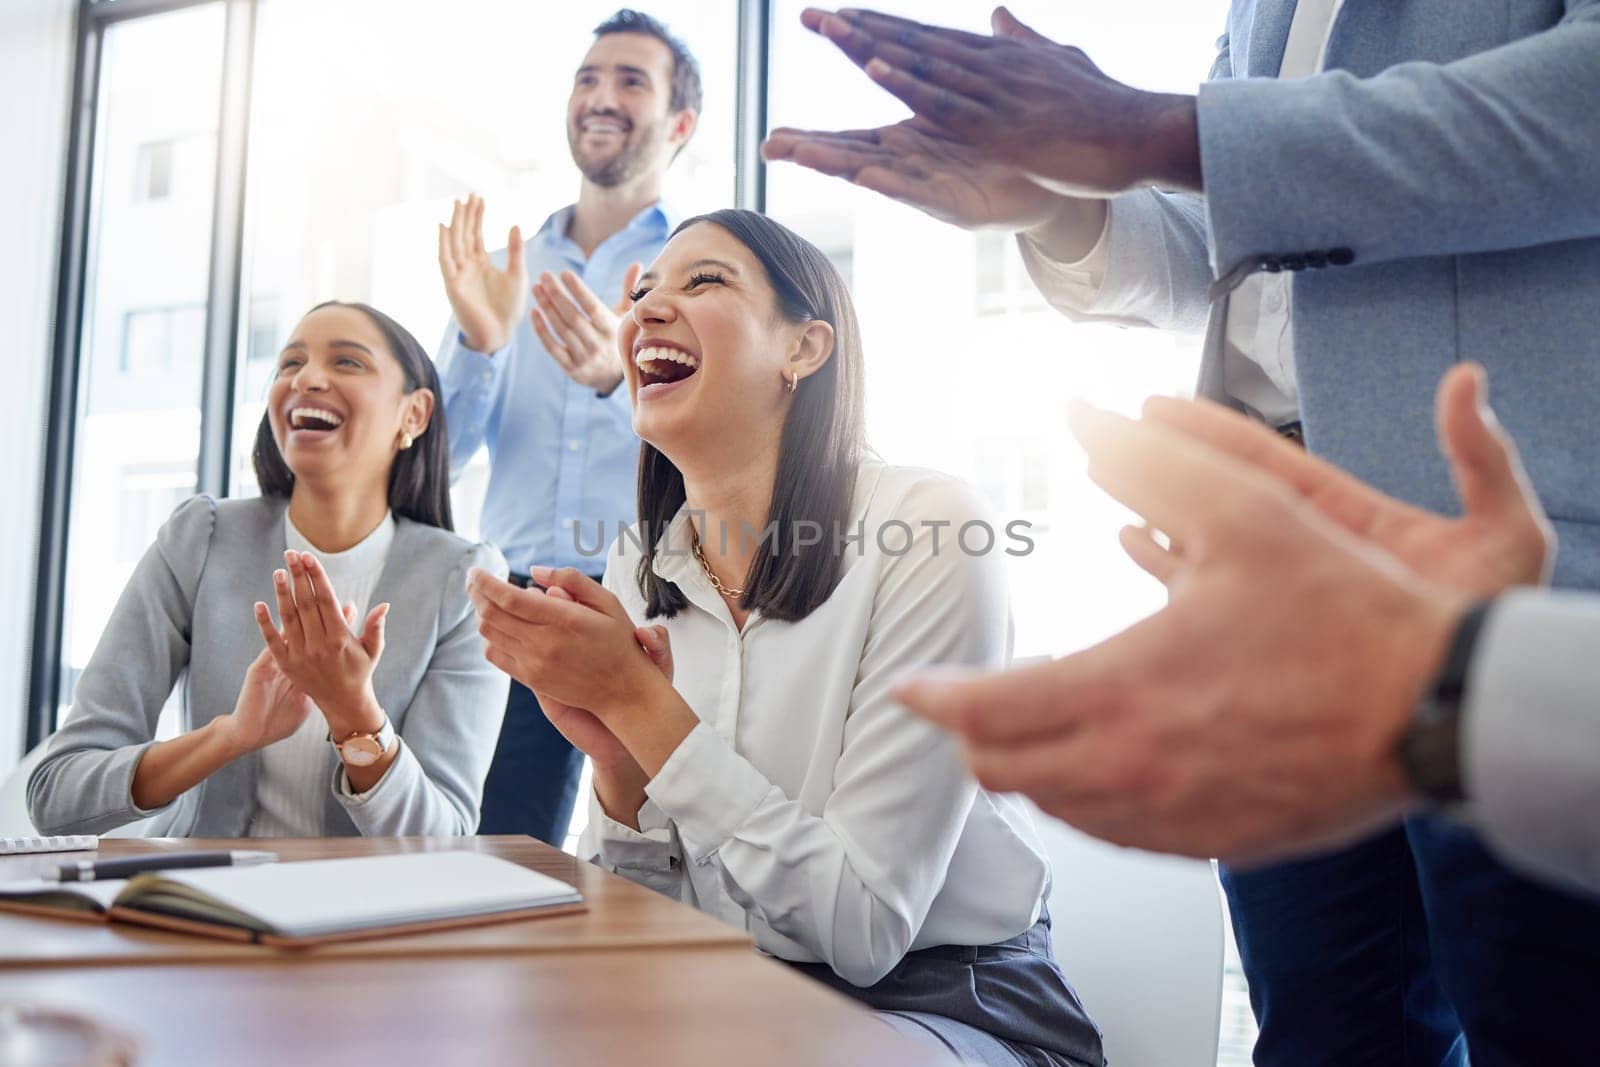 Motivation, audience with an applause and in a business meeting at work with a lens flare together. Support or celebration, success and colleagues clapping hands for good news or achievement by YuriArcurs